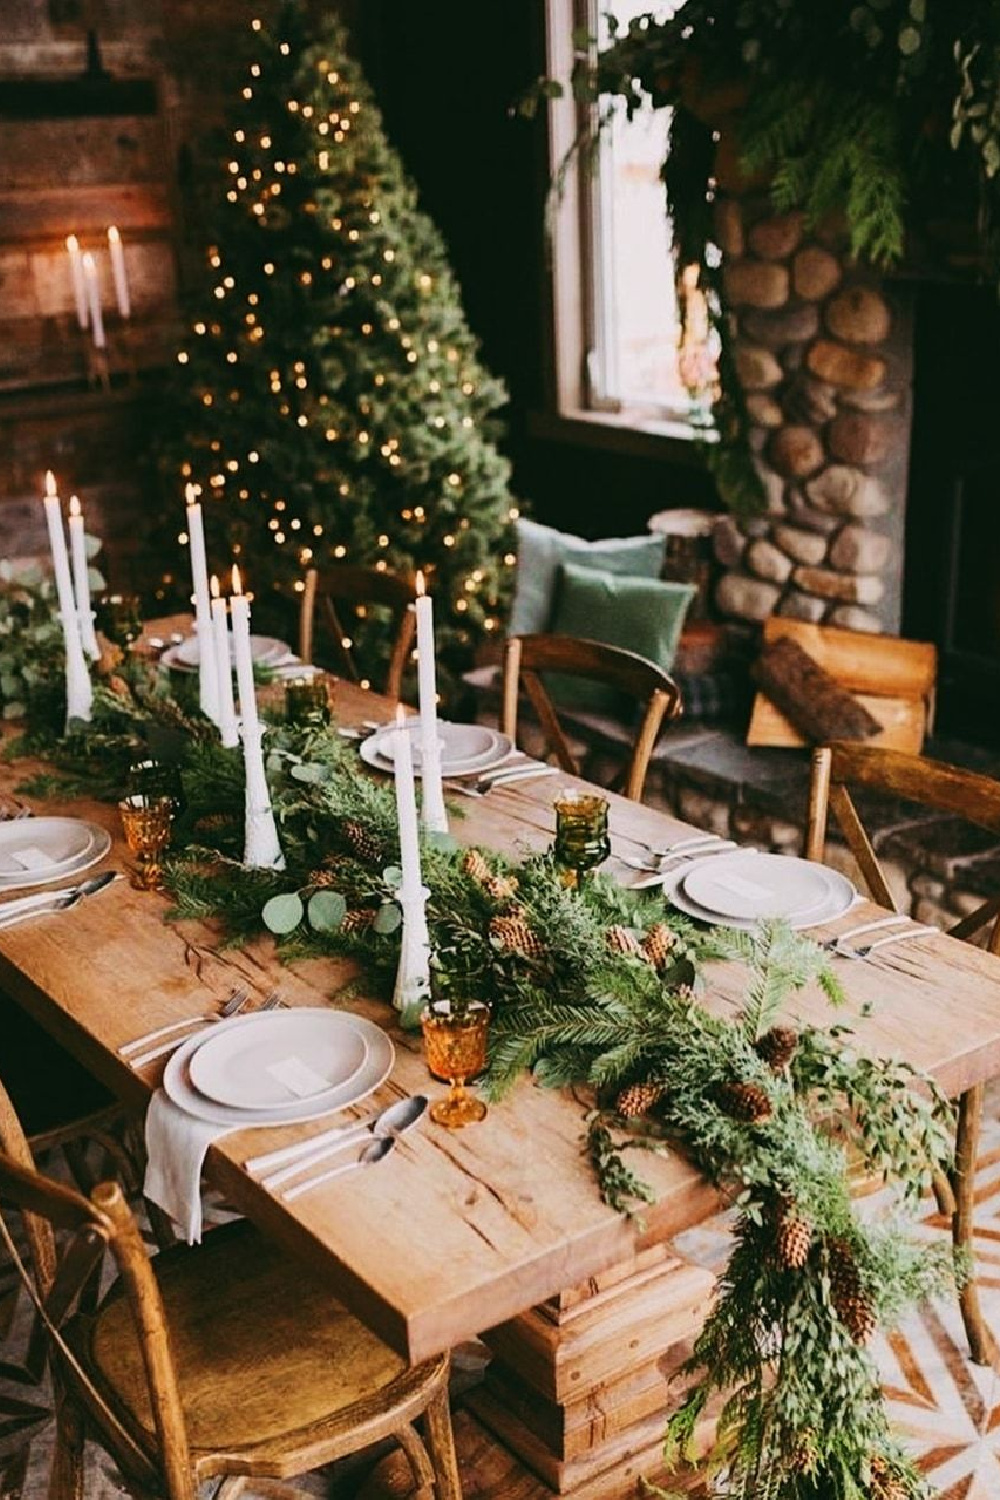 Beautiful Christmas tablescape in a rustic cottage - CozyChristmas on Tumblr. #cozychristmas #rusticchristmas #holidaytablescape